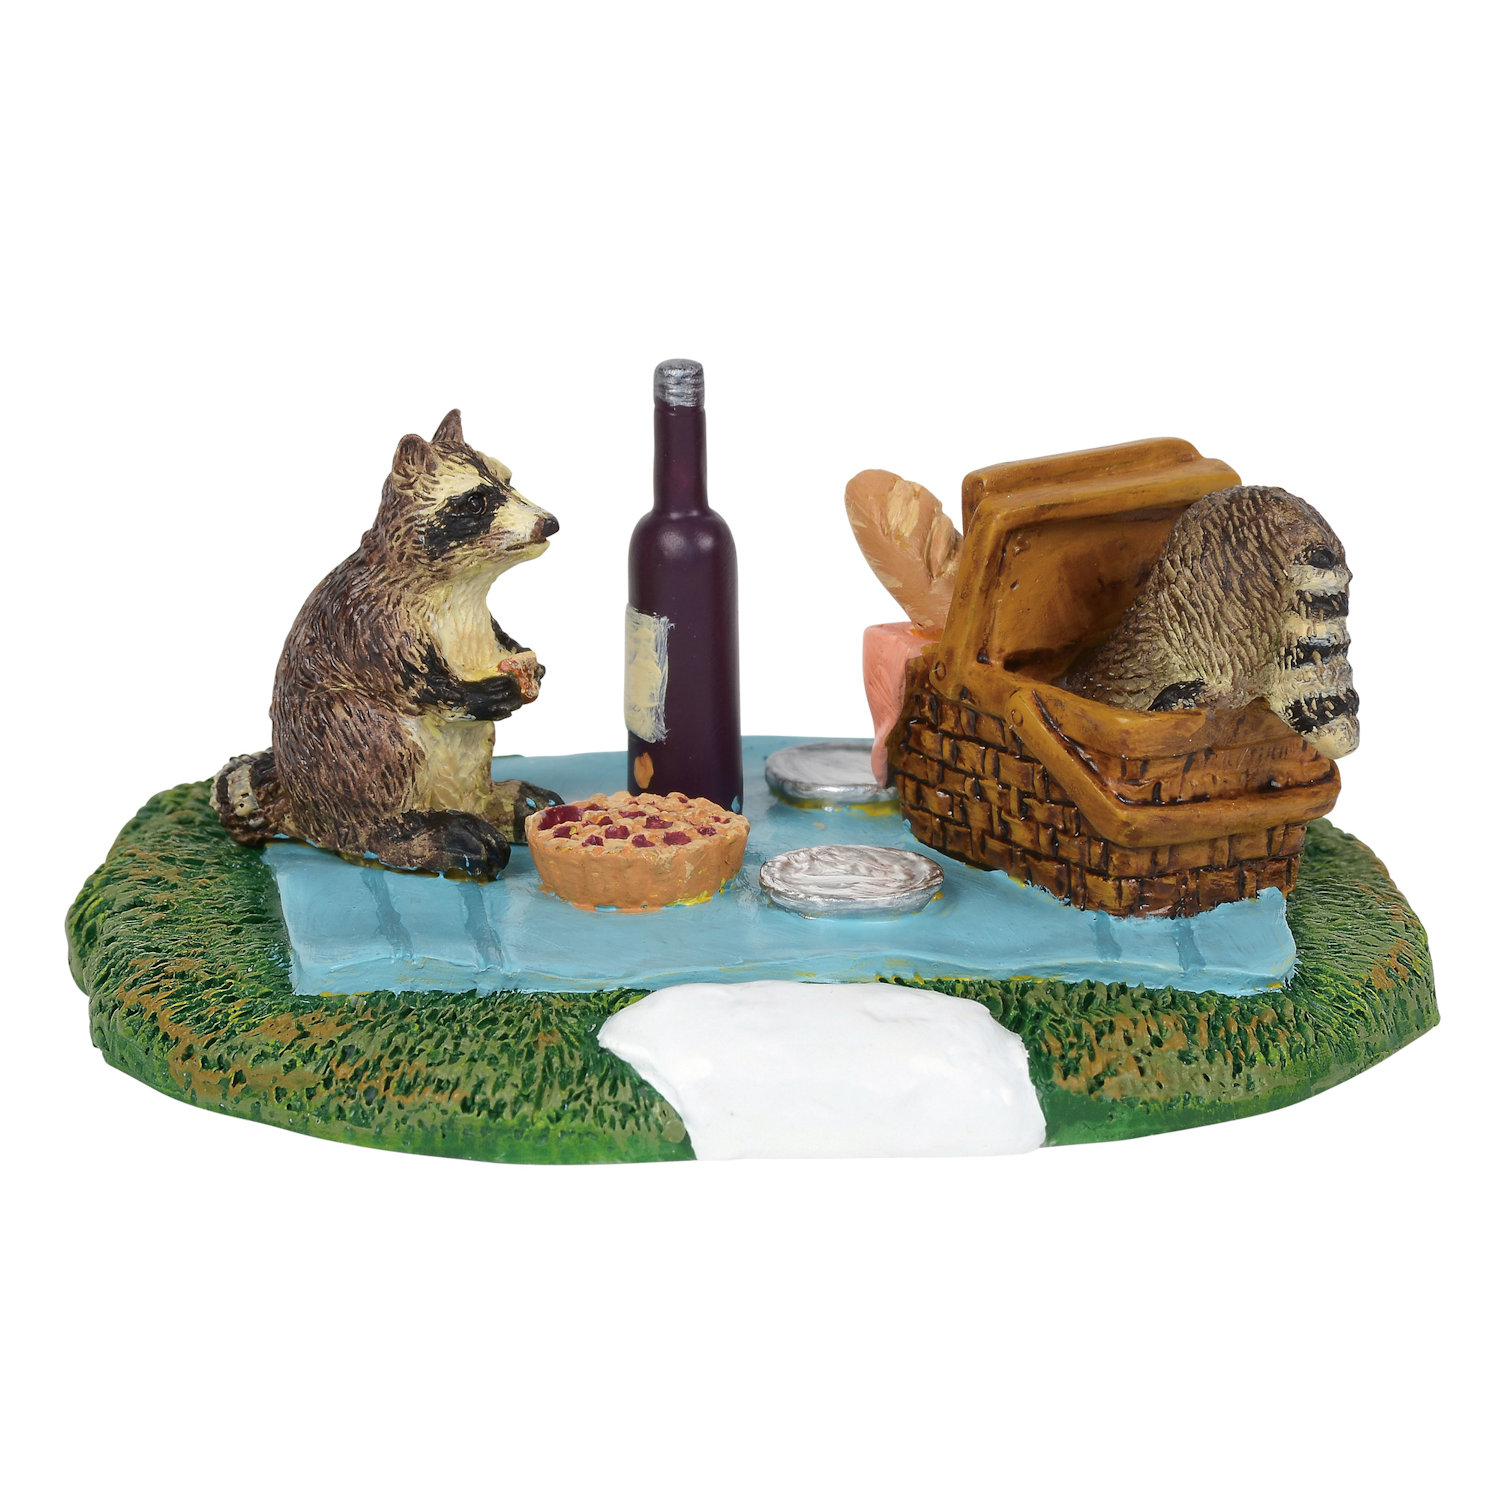 Department 56 Cross Village Product Woodland Raccoon Picnic Accessory